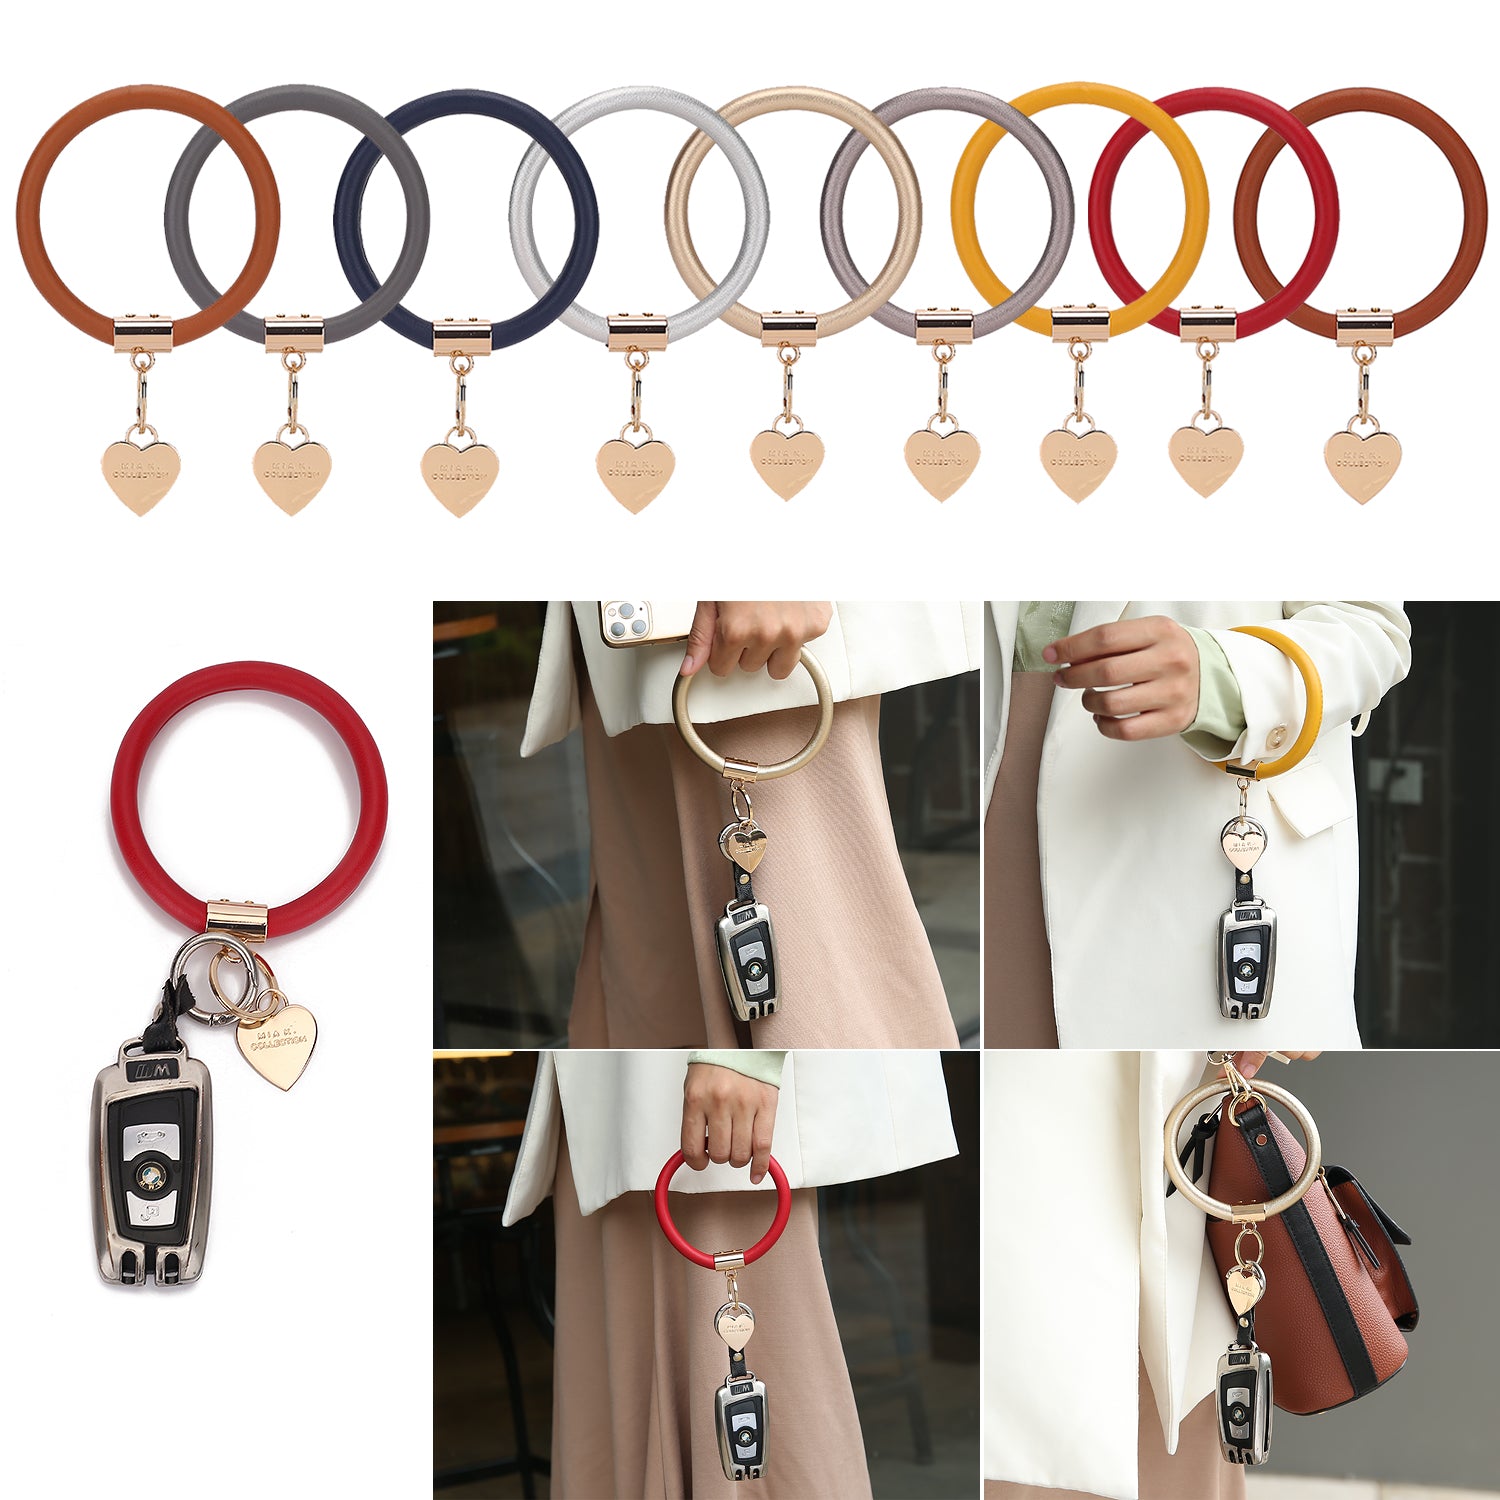 Collection of colorful Jasmine Vegan Leather Women Bangle Wristlet Keychain sets with heart-shaped charms showcased in different styles and being used as a versatile accessory by Pink Orpheus.